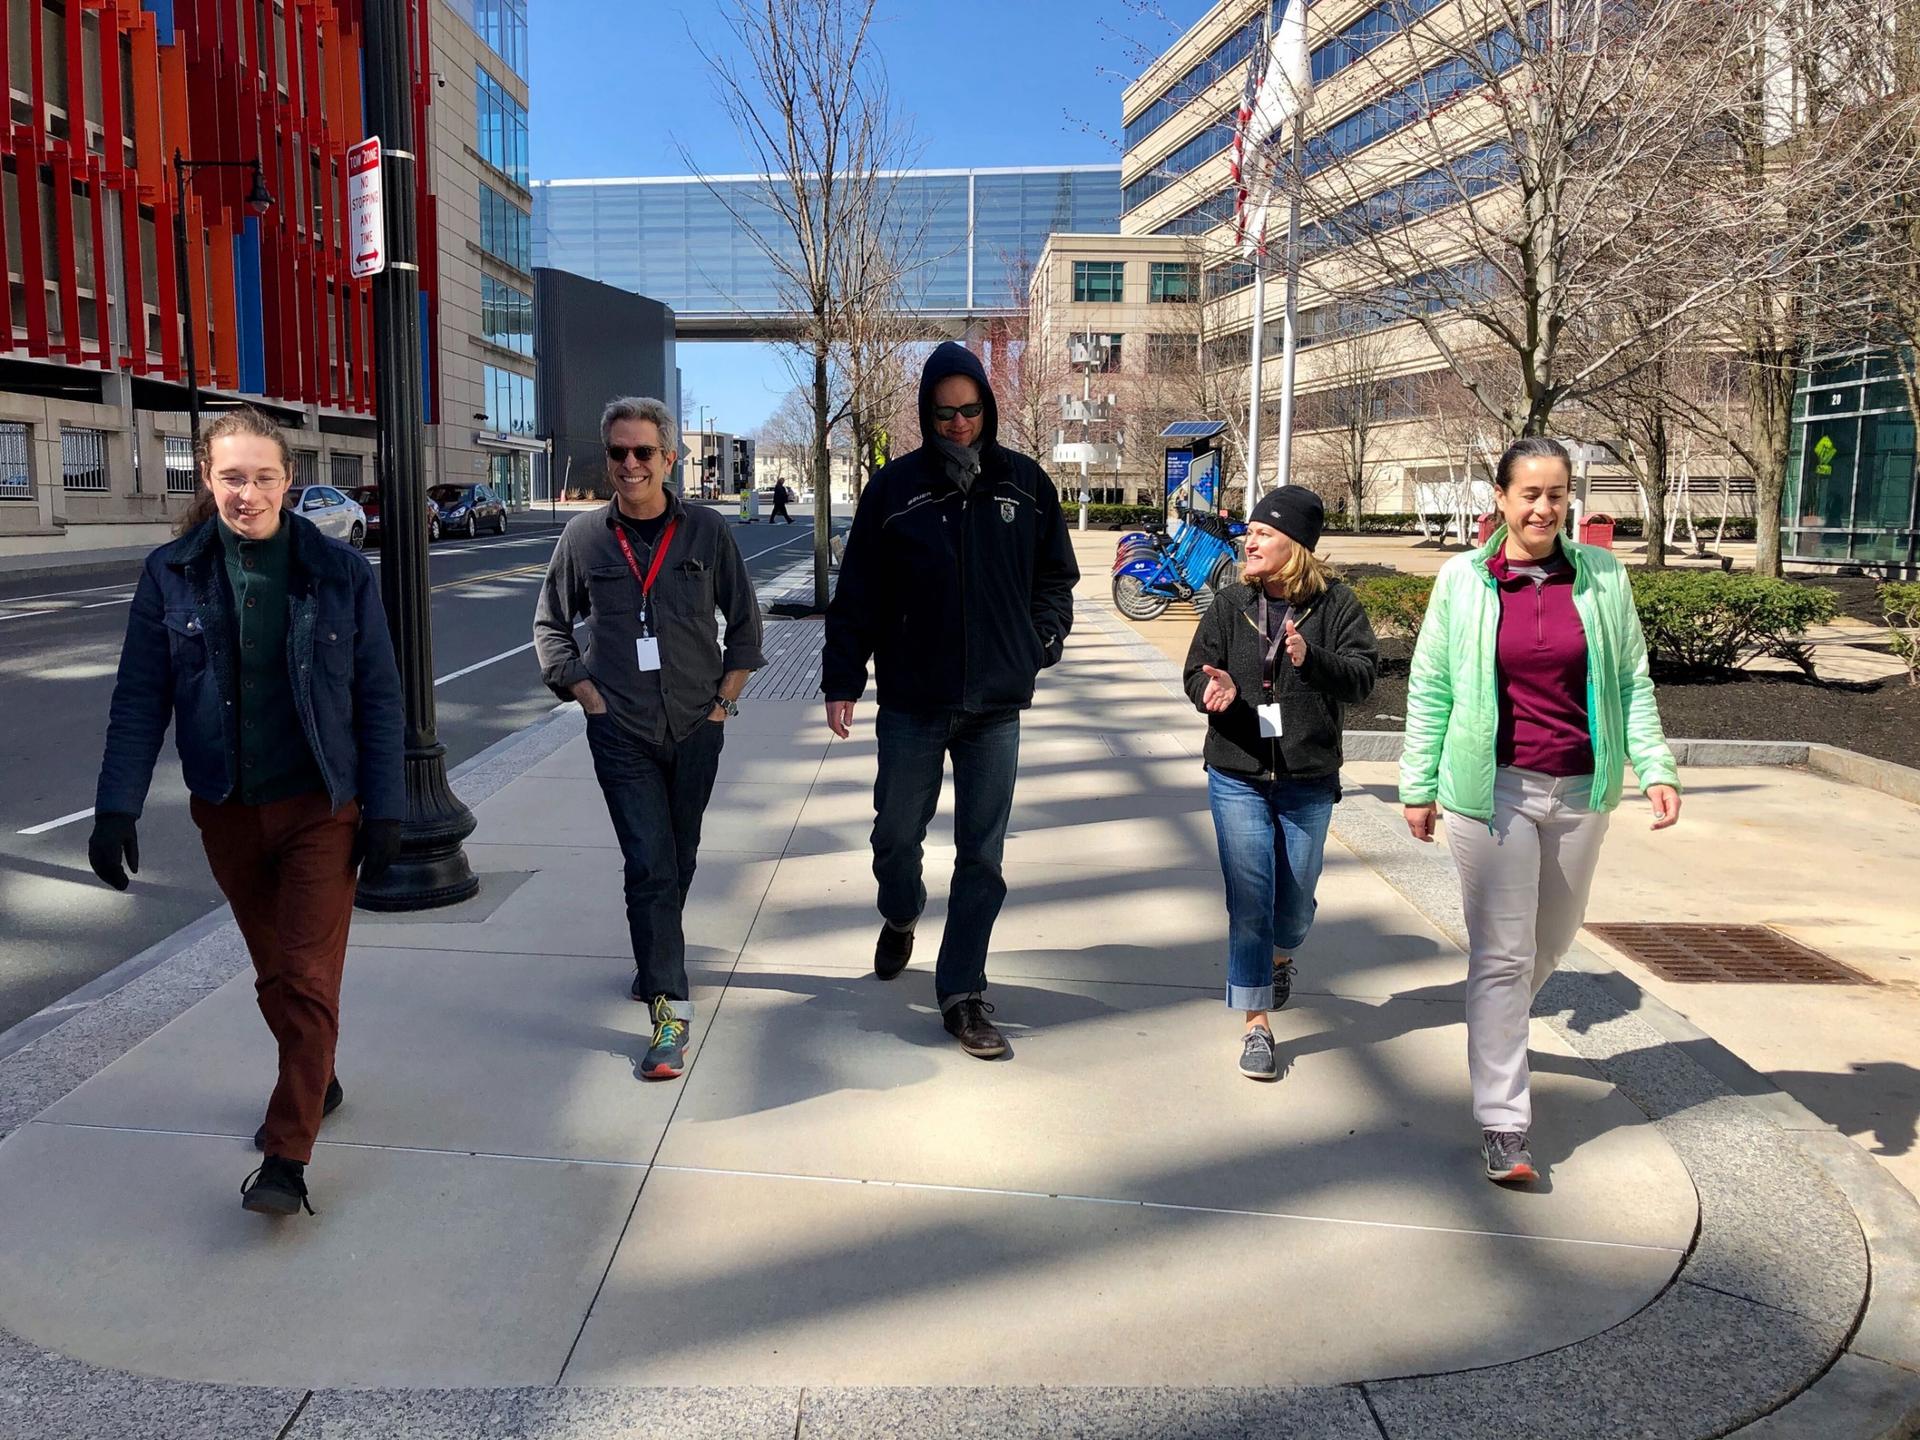 Five staff members from The World are shown walking on the sidewalk next to a colorful parking garage and the GBH headquarters building, west.